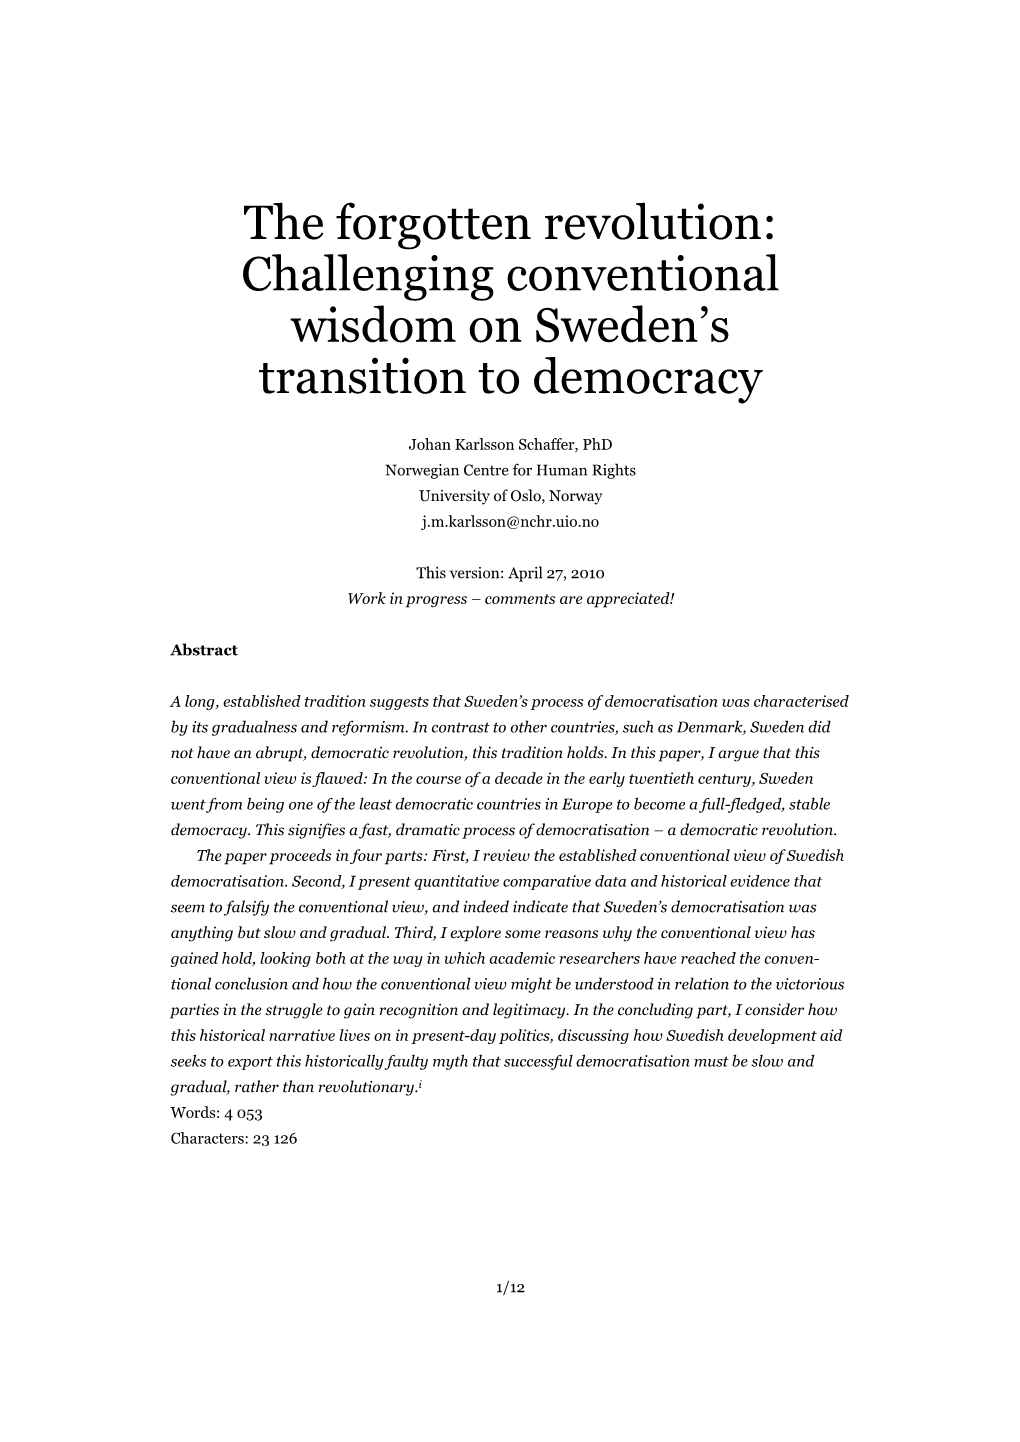 The Forgotten Revolution: Challenging Conventional Wisdom on Sweden's Transition to Democracy